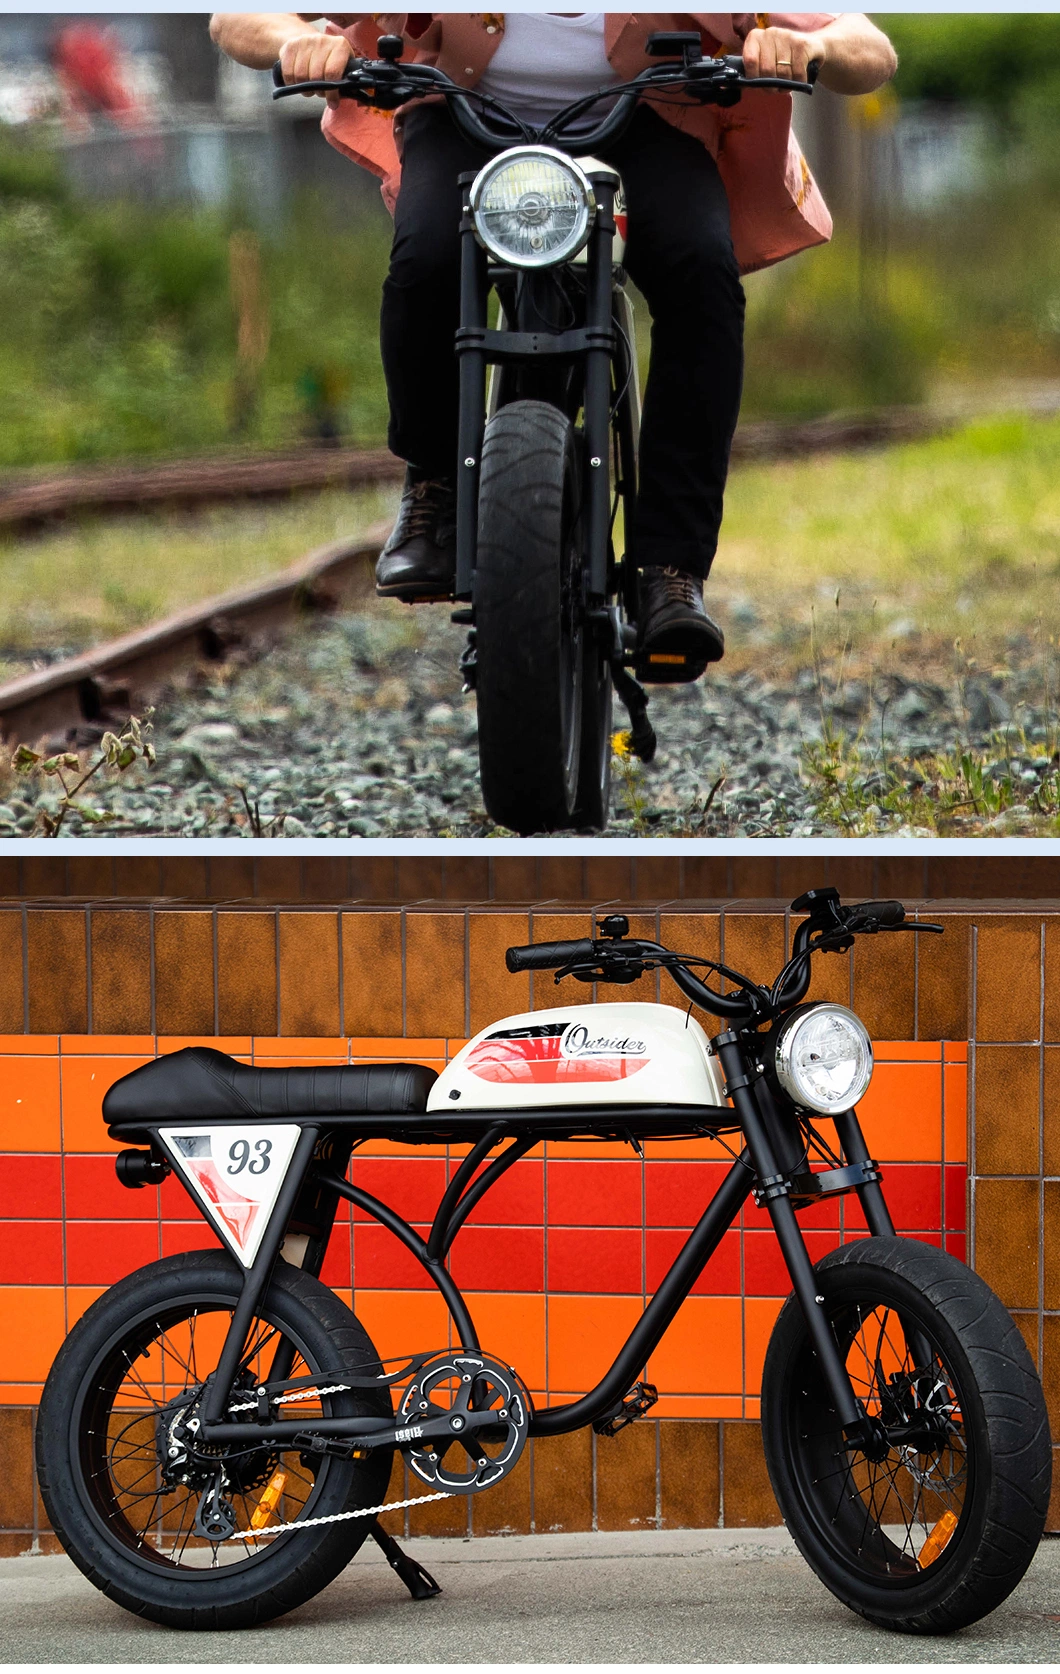 Electric Bicycles Can Save Energy Compared to Traditional Bicycles